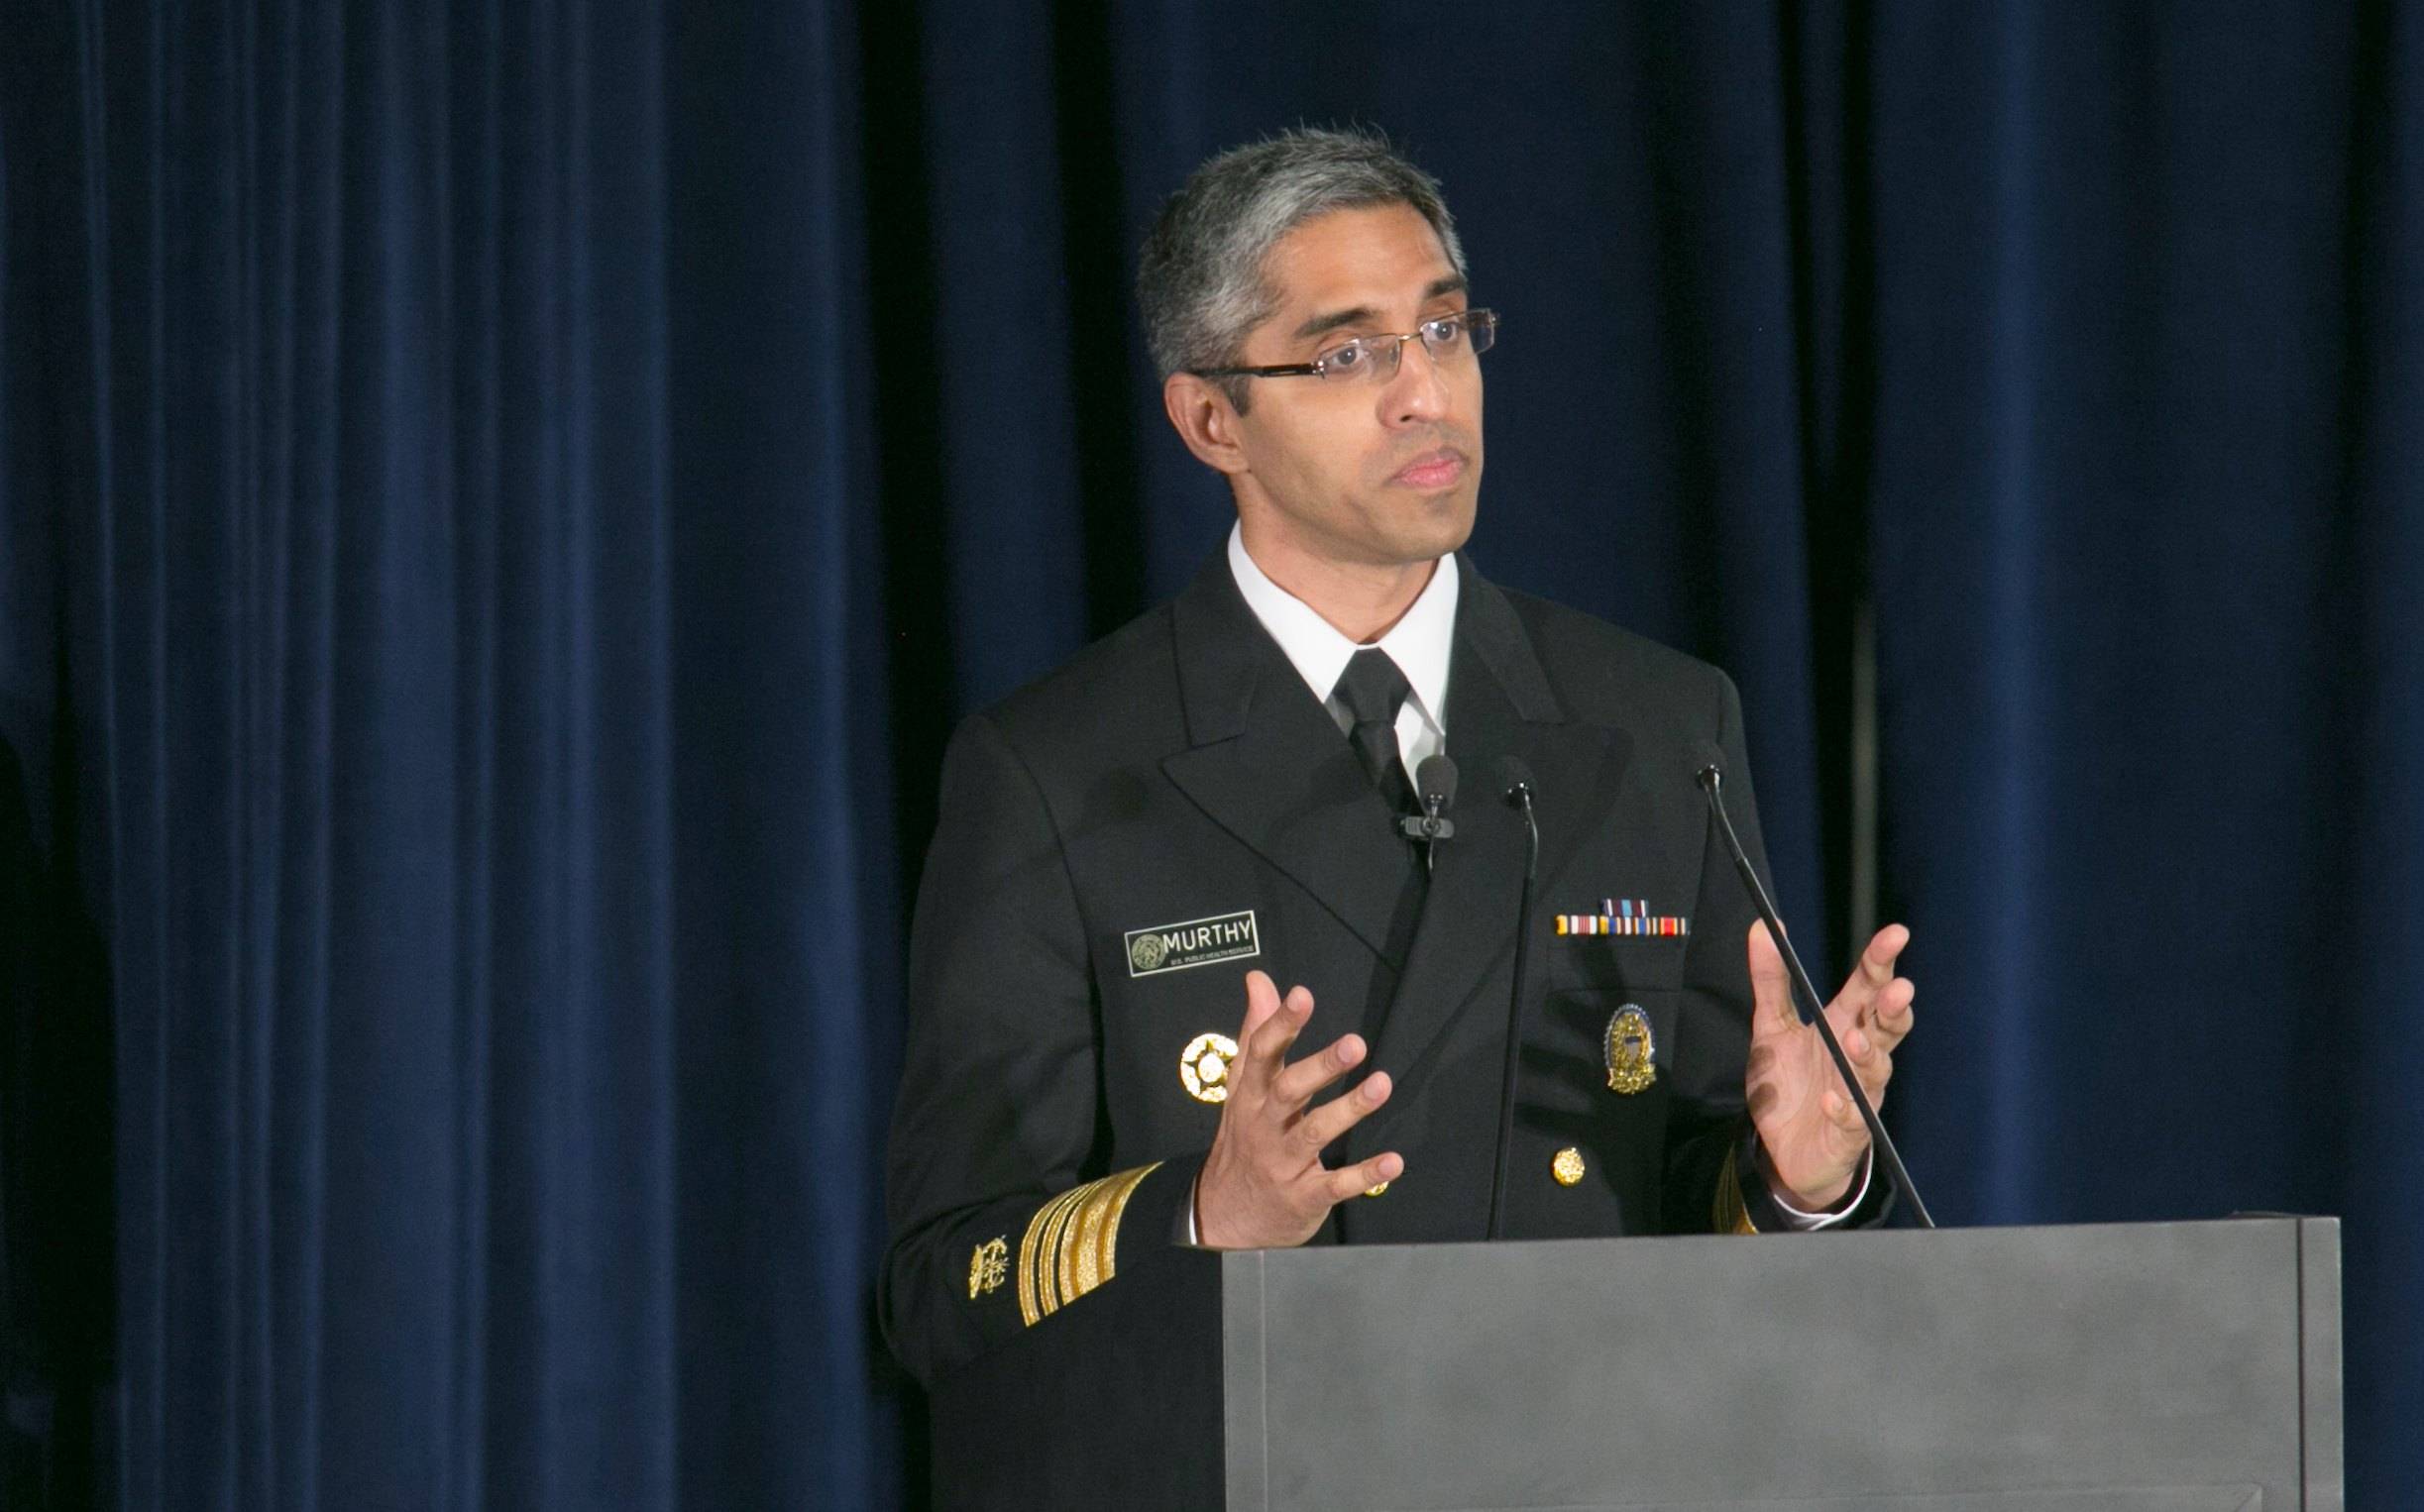 ATLANTA, GA: Surgeon General of the United States Vivek H. Murthy speaks on the epidemic of prescription drug addition before the arrival of President Barack Obama at the National Rx Drug Abuse and Heroin Summit on March 29, 2016 in Atlanta, Georgia.  (Jessica McGowan/Getty Images)